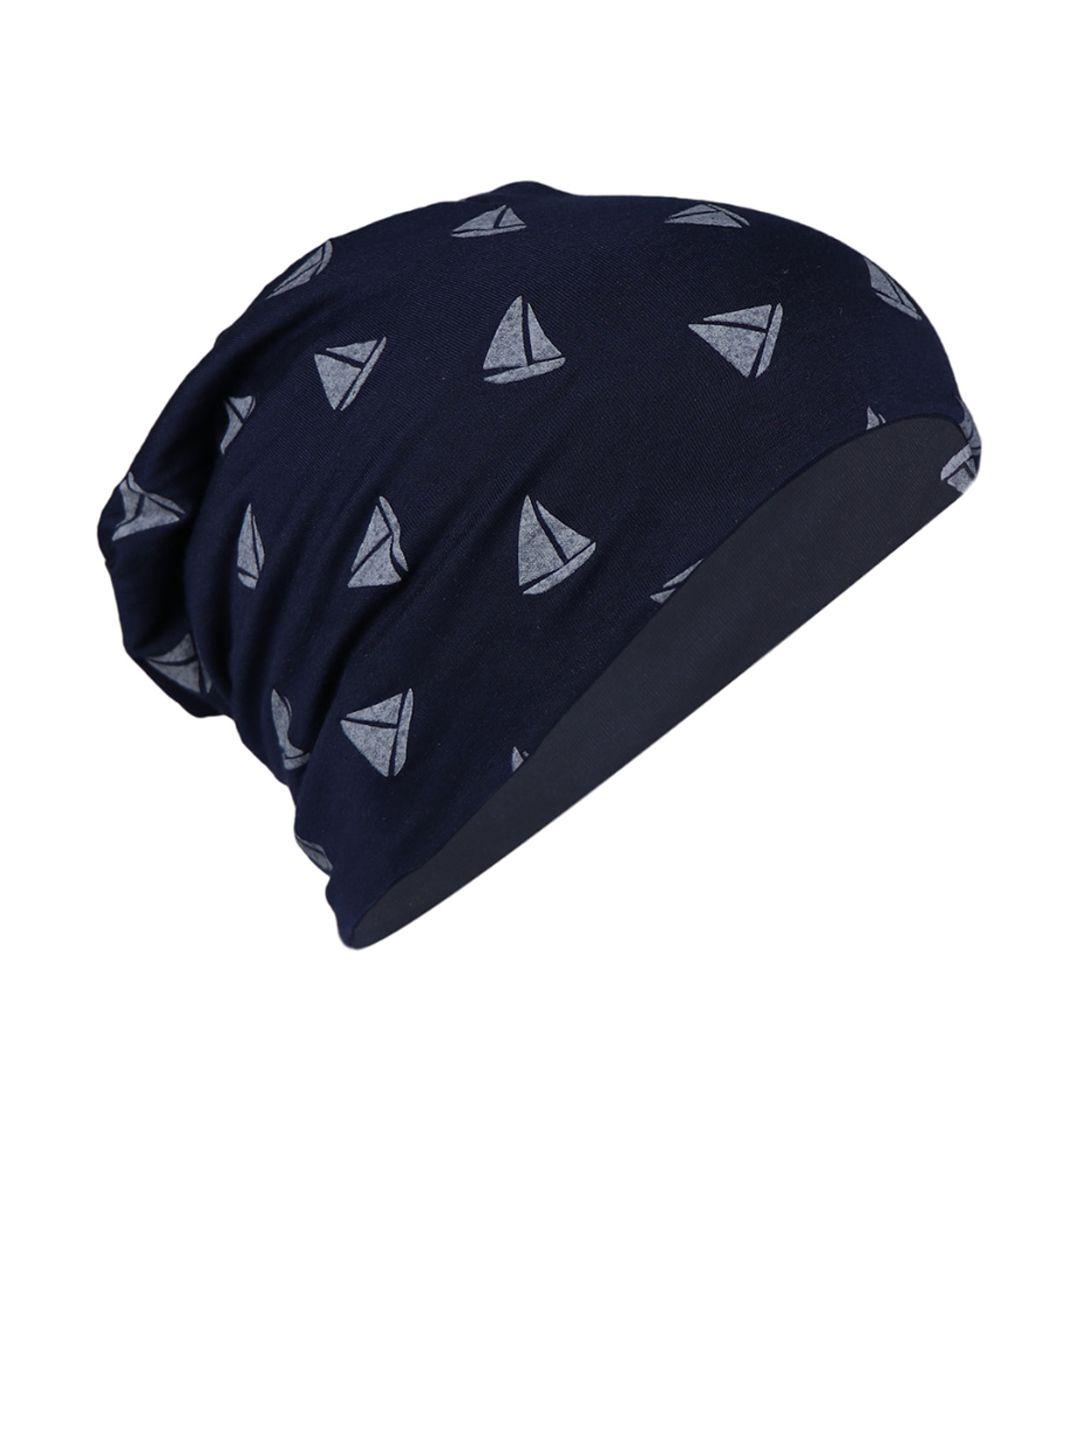 isweven-unisex-navy-blue-printed-beanie